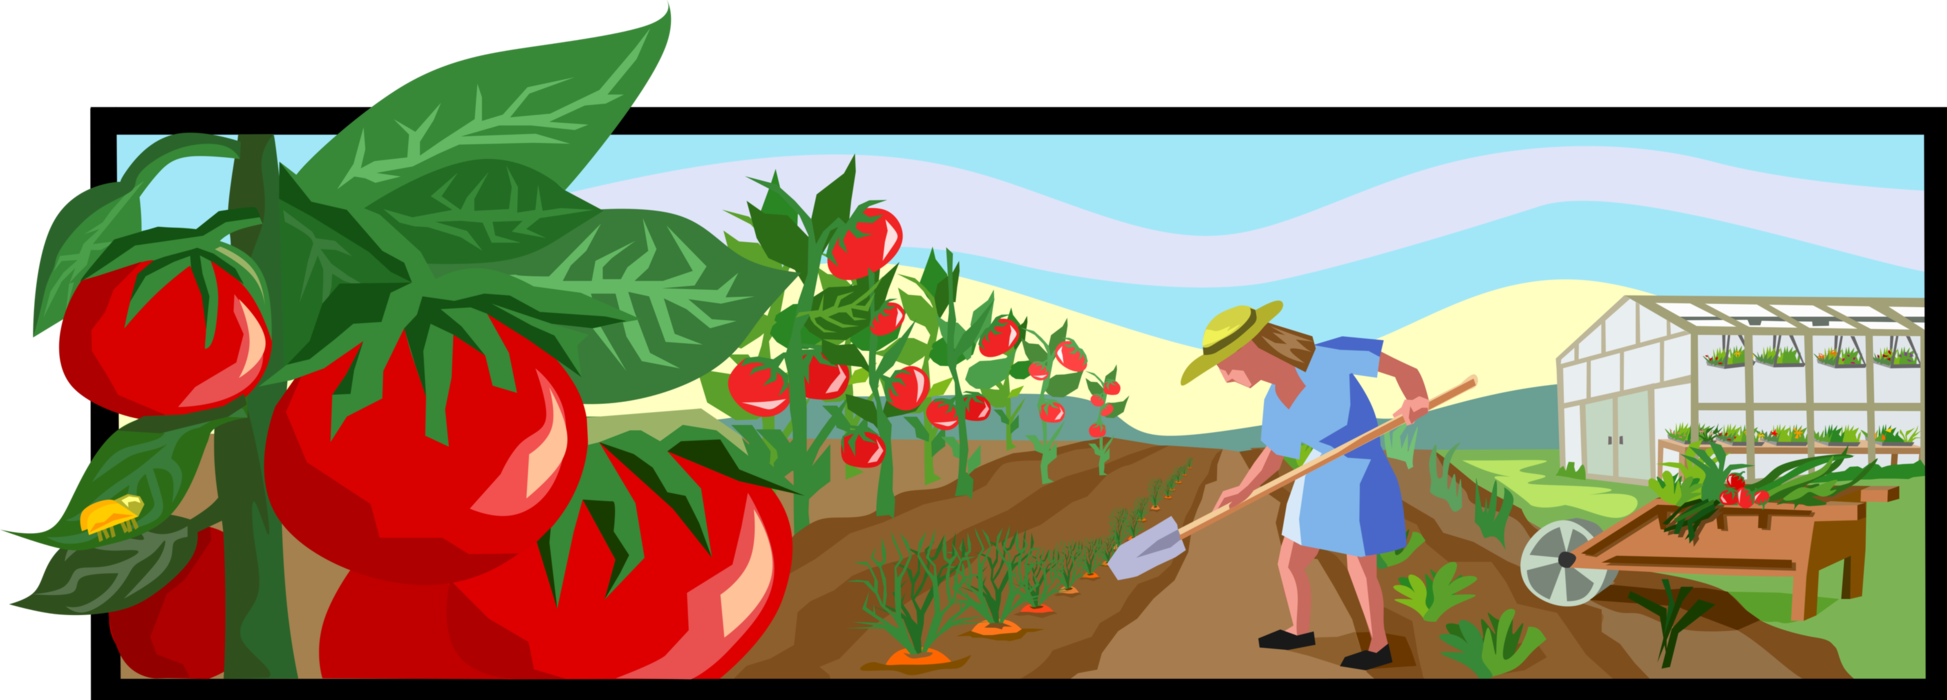 Vector Illustration of Gardener with Shovel Tends to Carrots and Tomato Crop while Gardening Outdoors